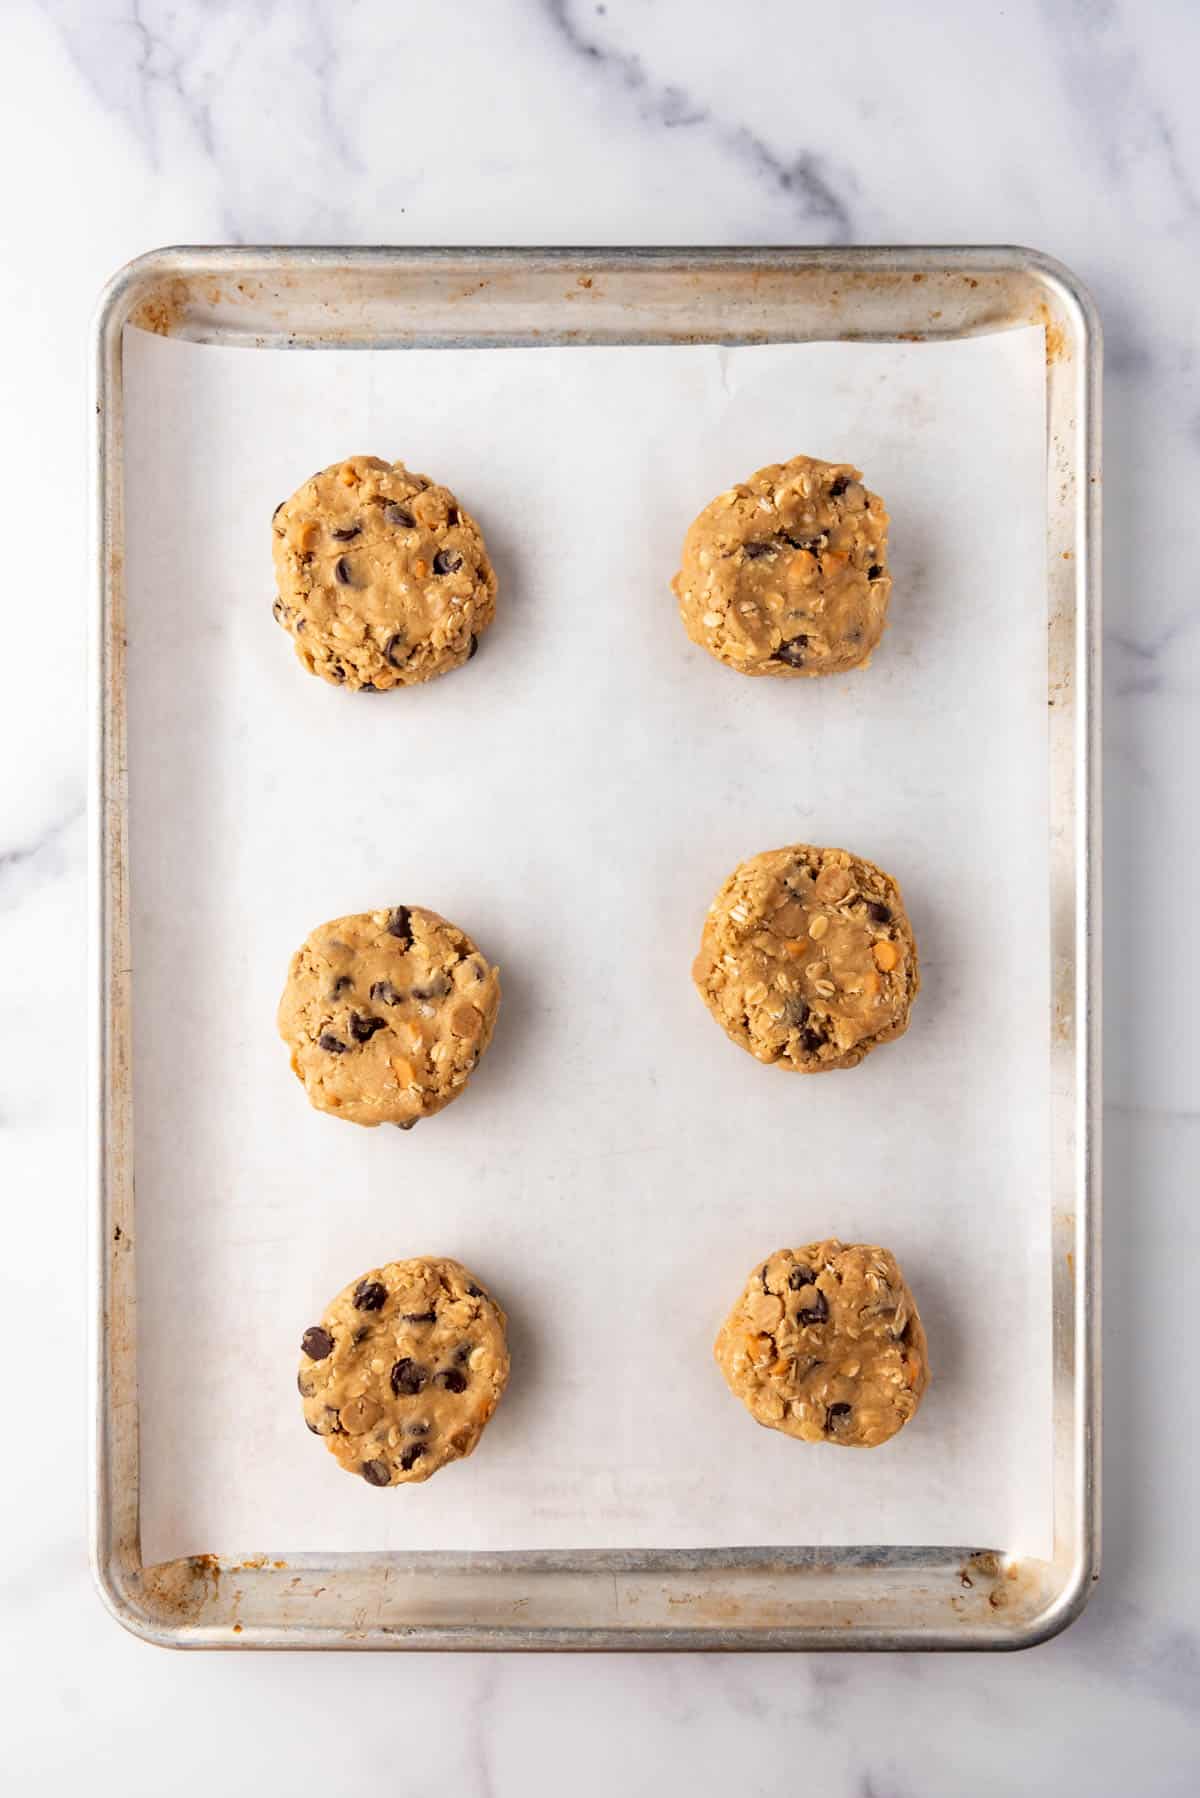 Oatmeal butterscotch cookie dough balls on a baking sheet lined with parchment paper.